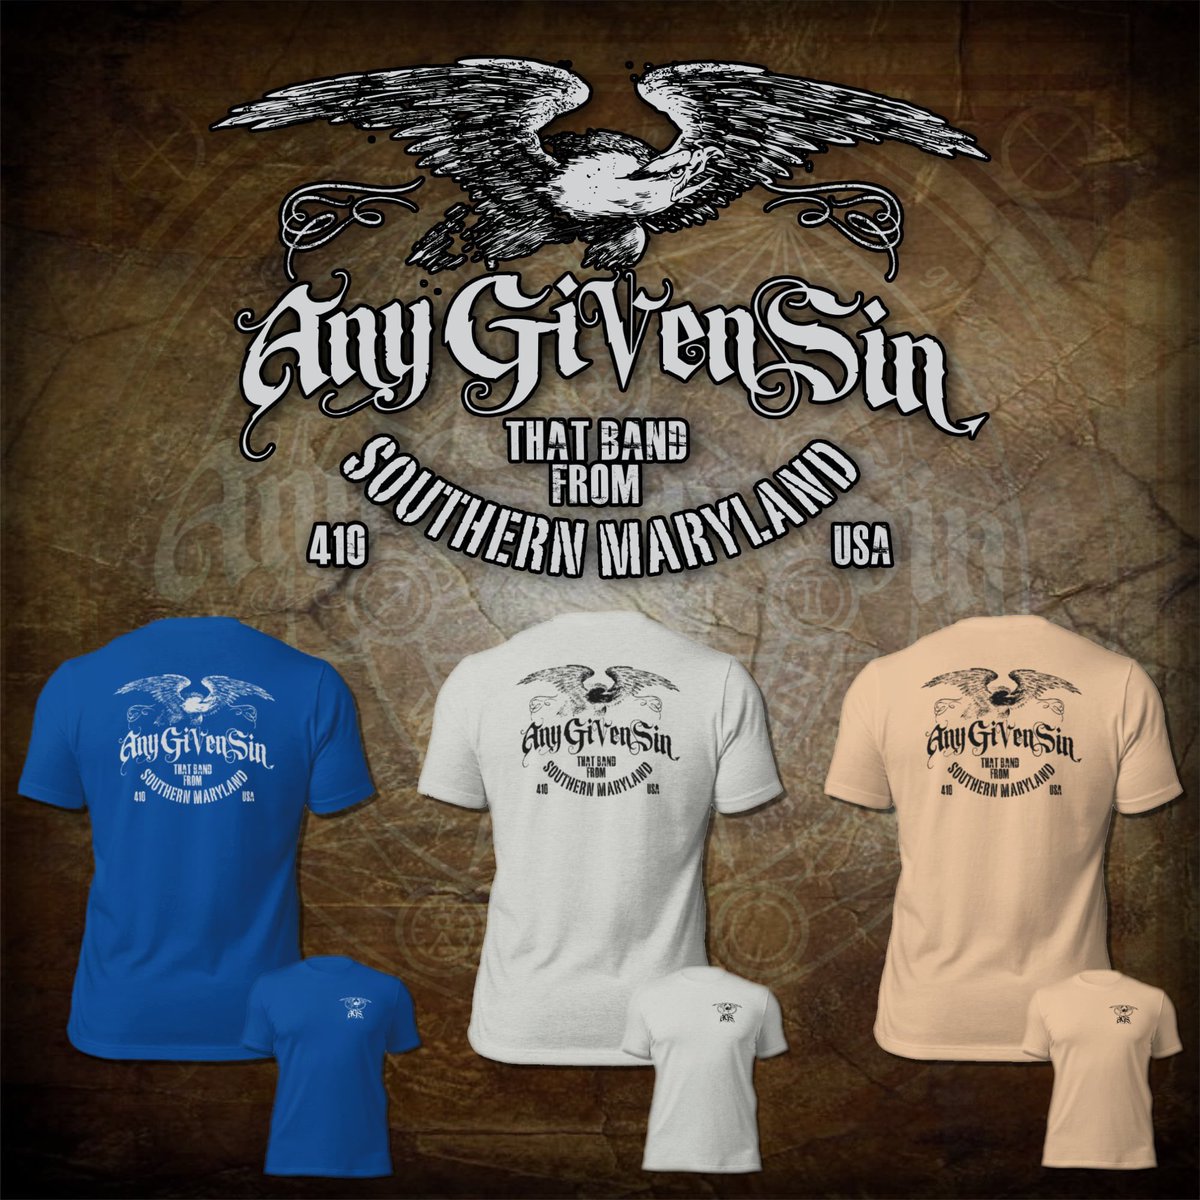 🚨 BRAND NEW 🚨 It’s time to let everyone know. Grab yours NOW AnyGivenSinBand.com/store #AnyGivenSin #ThatBand #Southern #Maryland #Loud #Proud #Rock